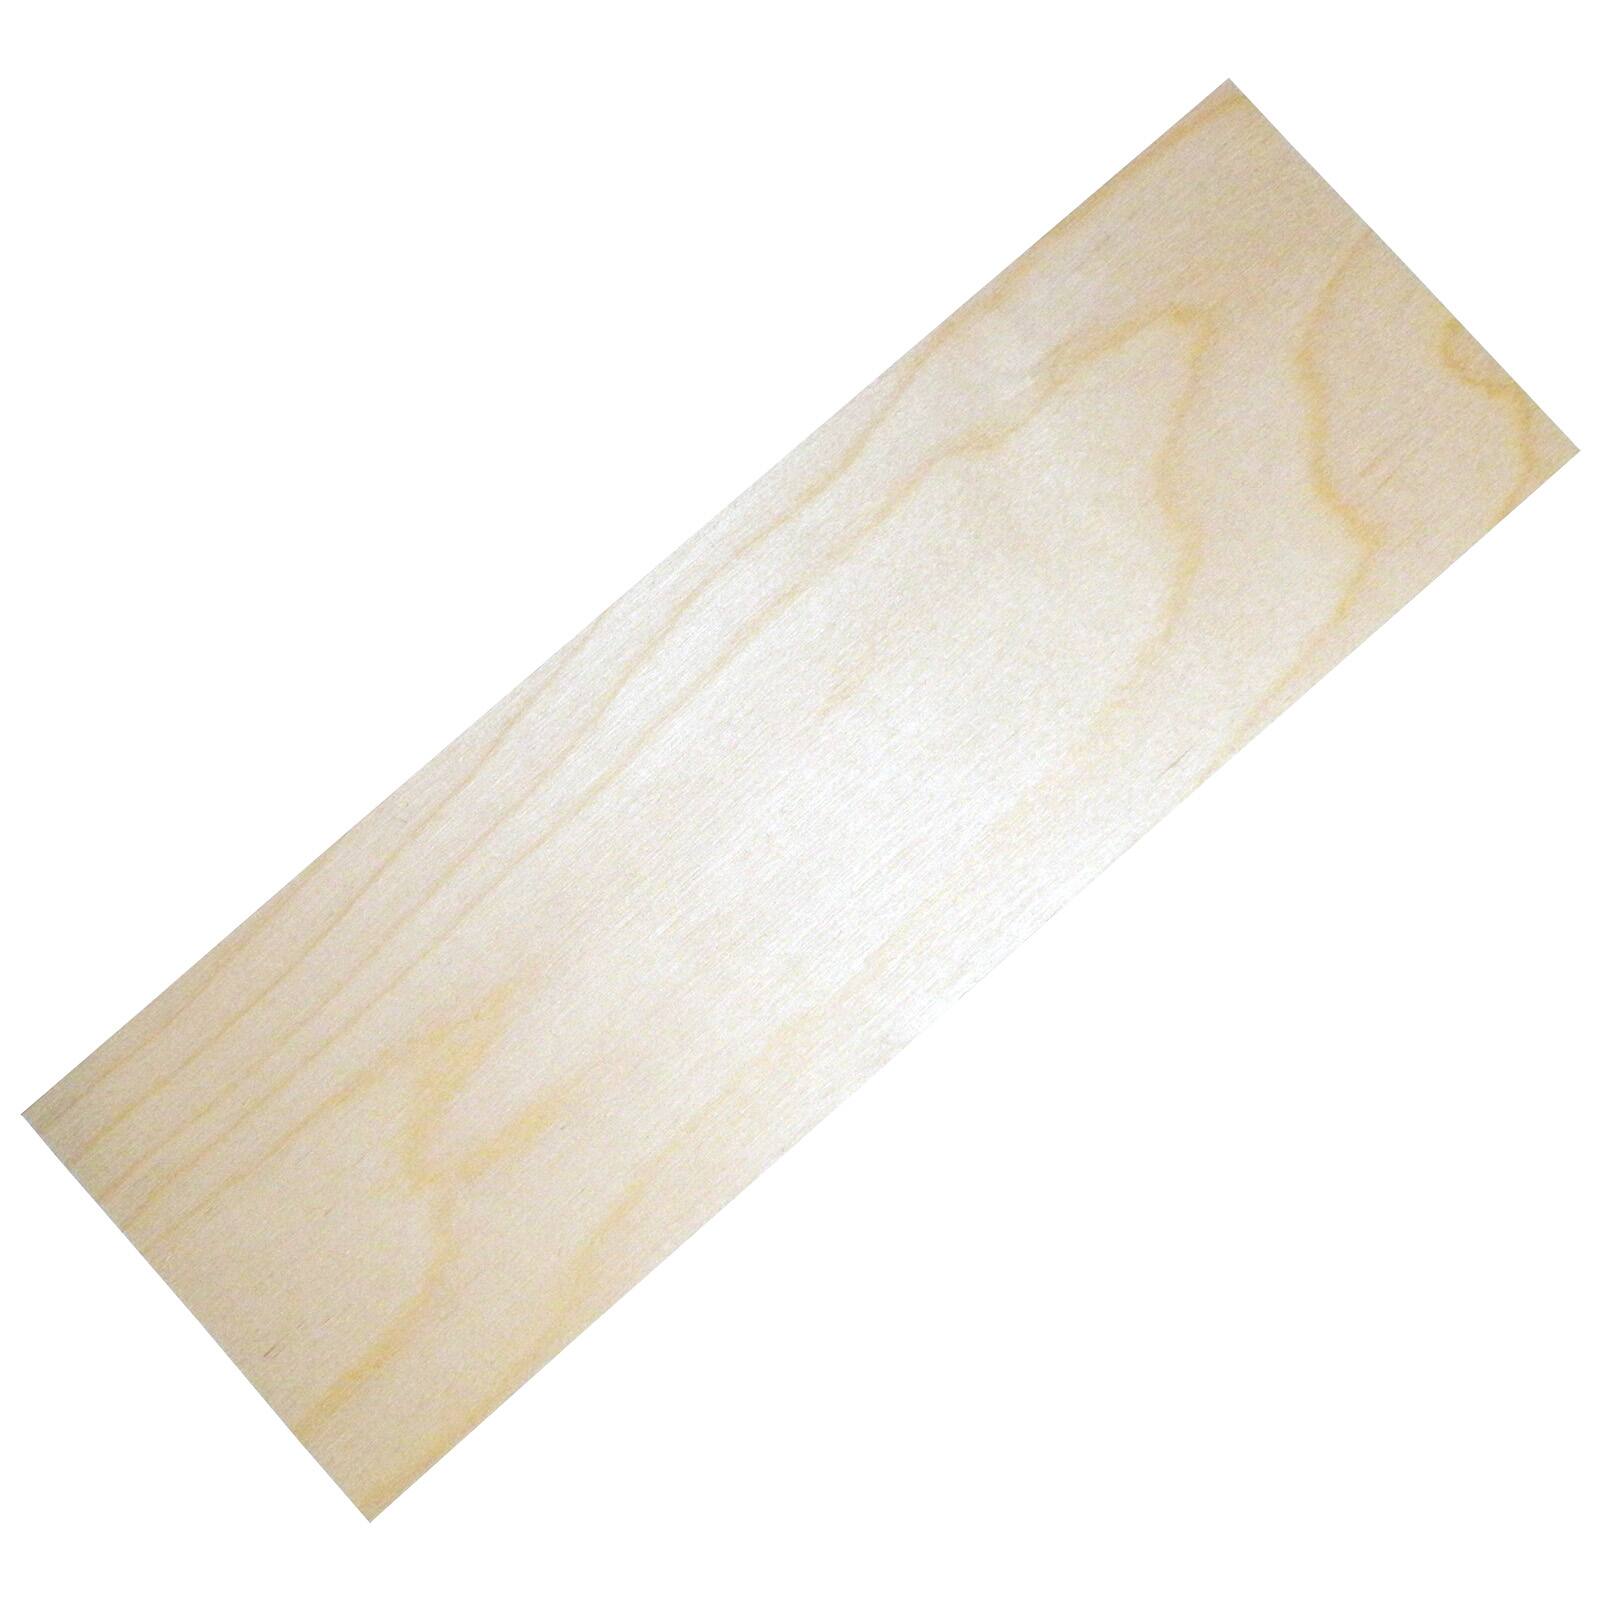 Buy The Revell 12 Baltic Birch Plywood Sheet At Michaels